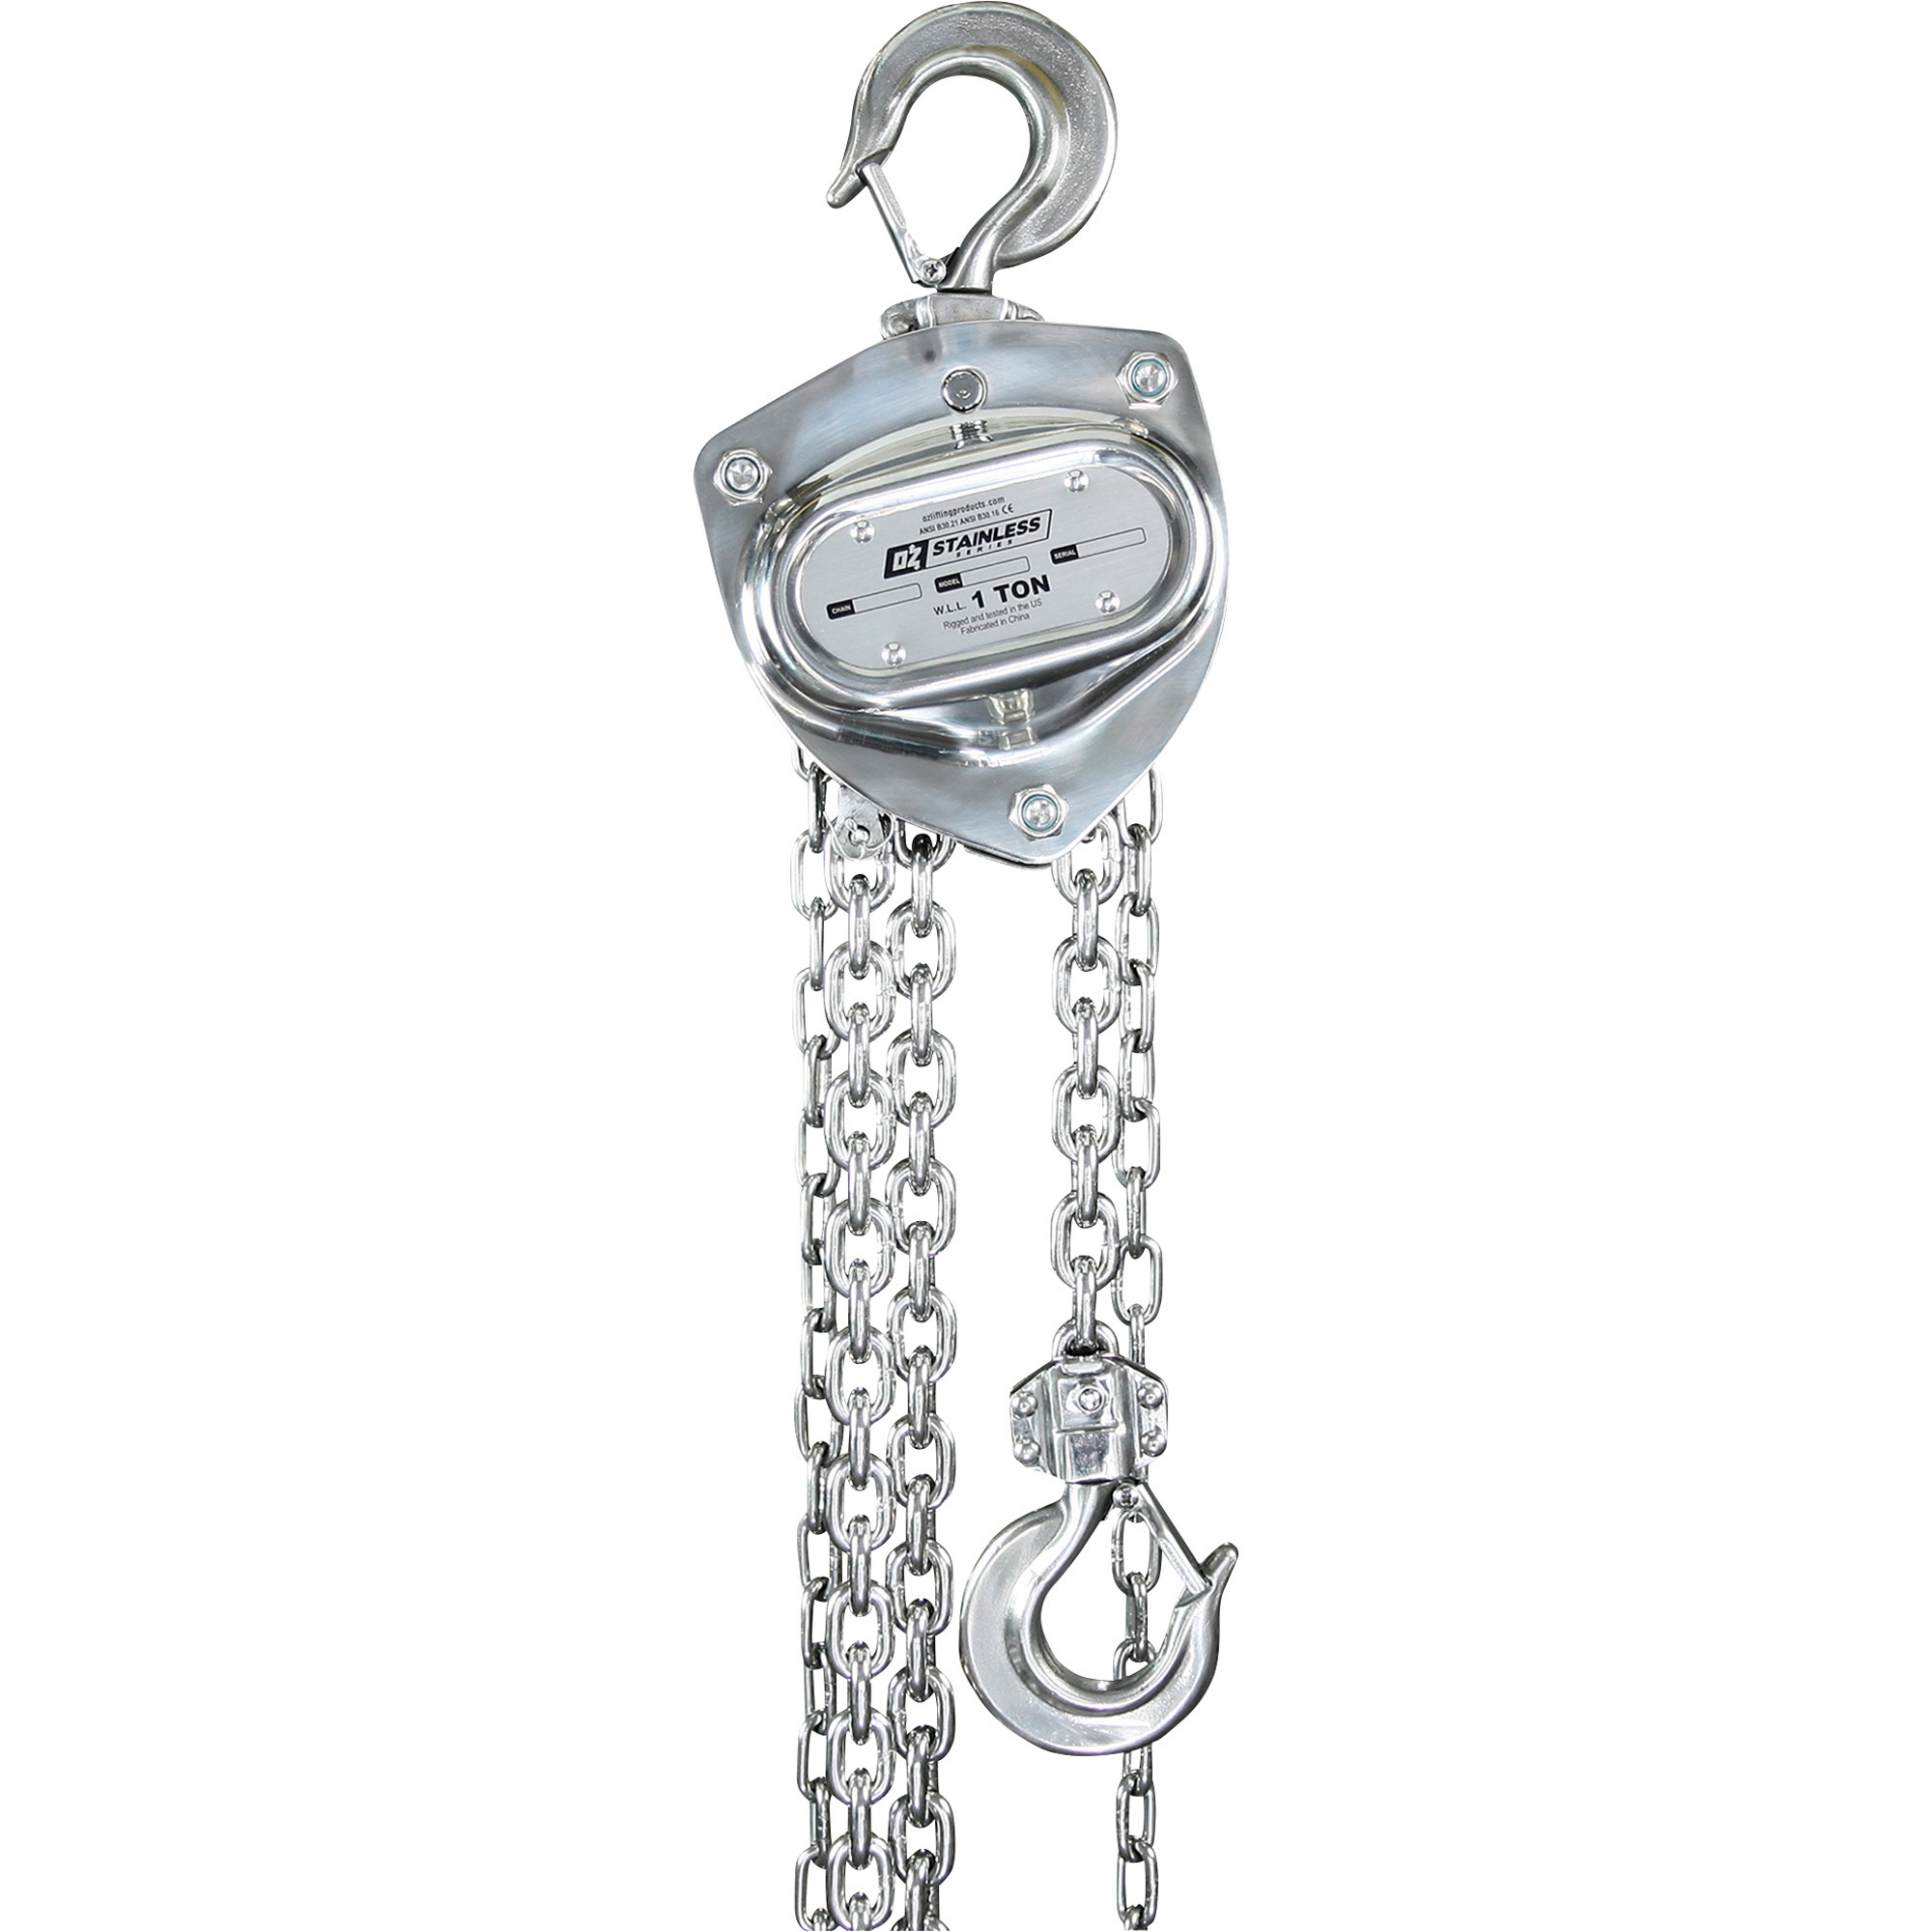 OZ Lifting Products Stainless Steel Manual Chain Hoist â 1-Ton Capacity, 20ft. Lift Height, Model OZSS010-20CH